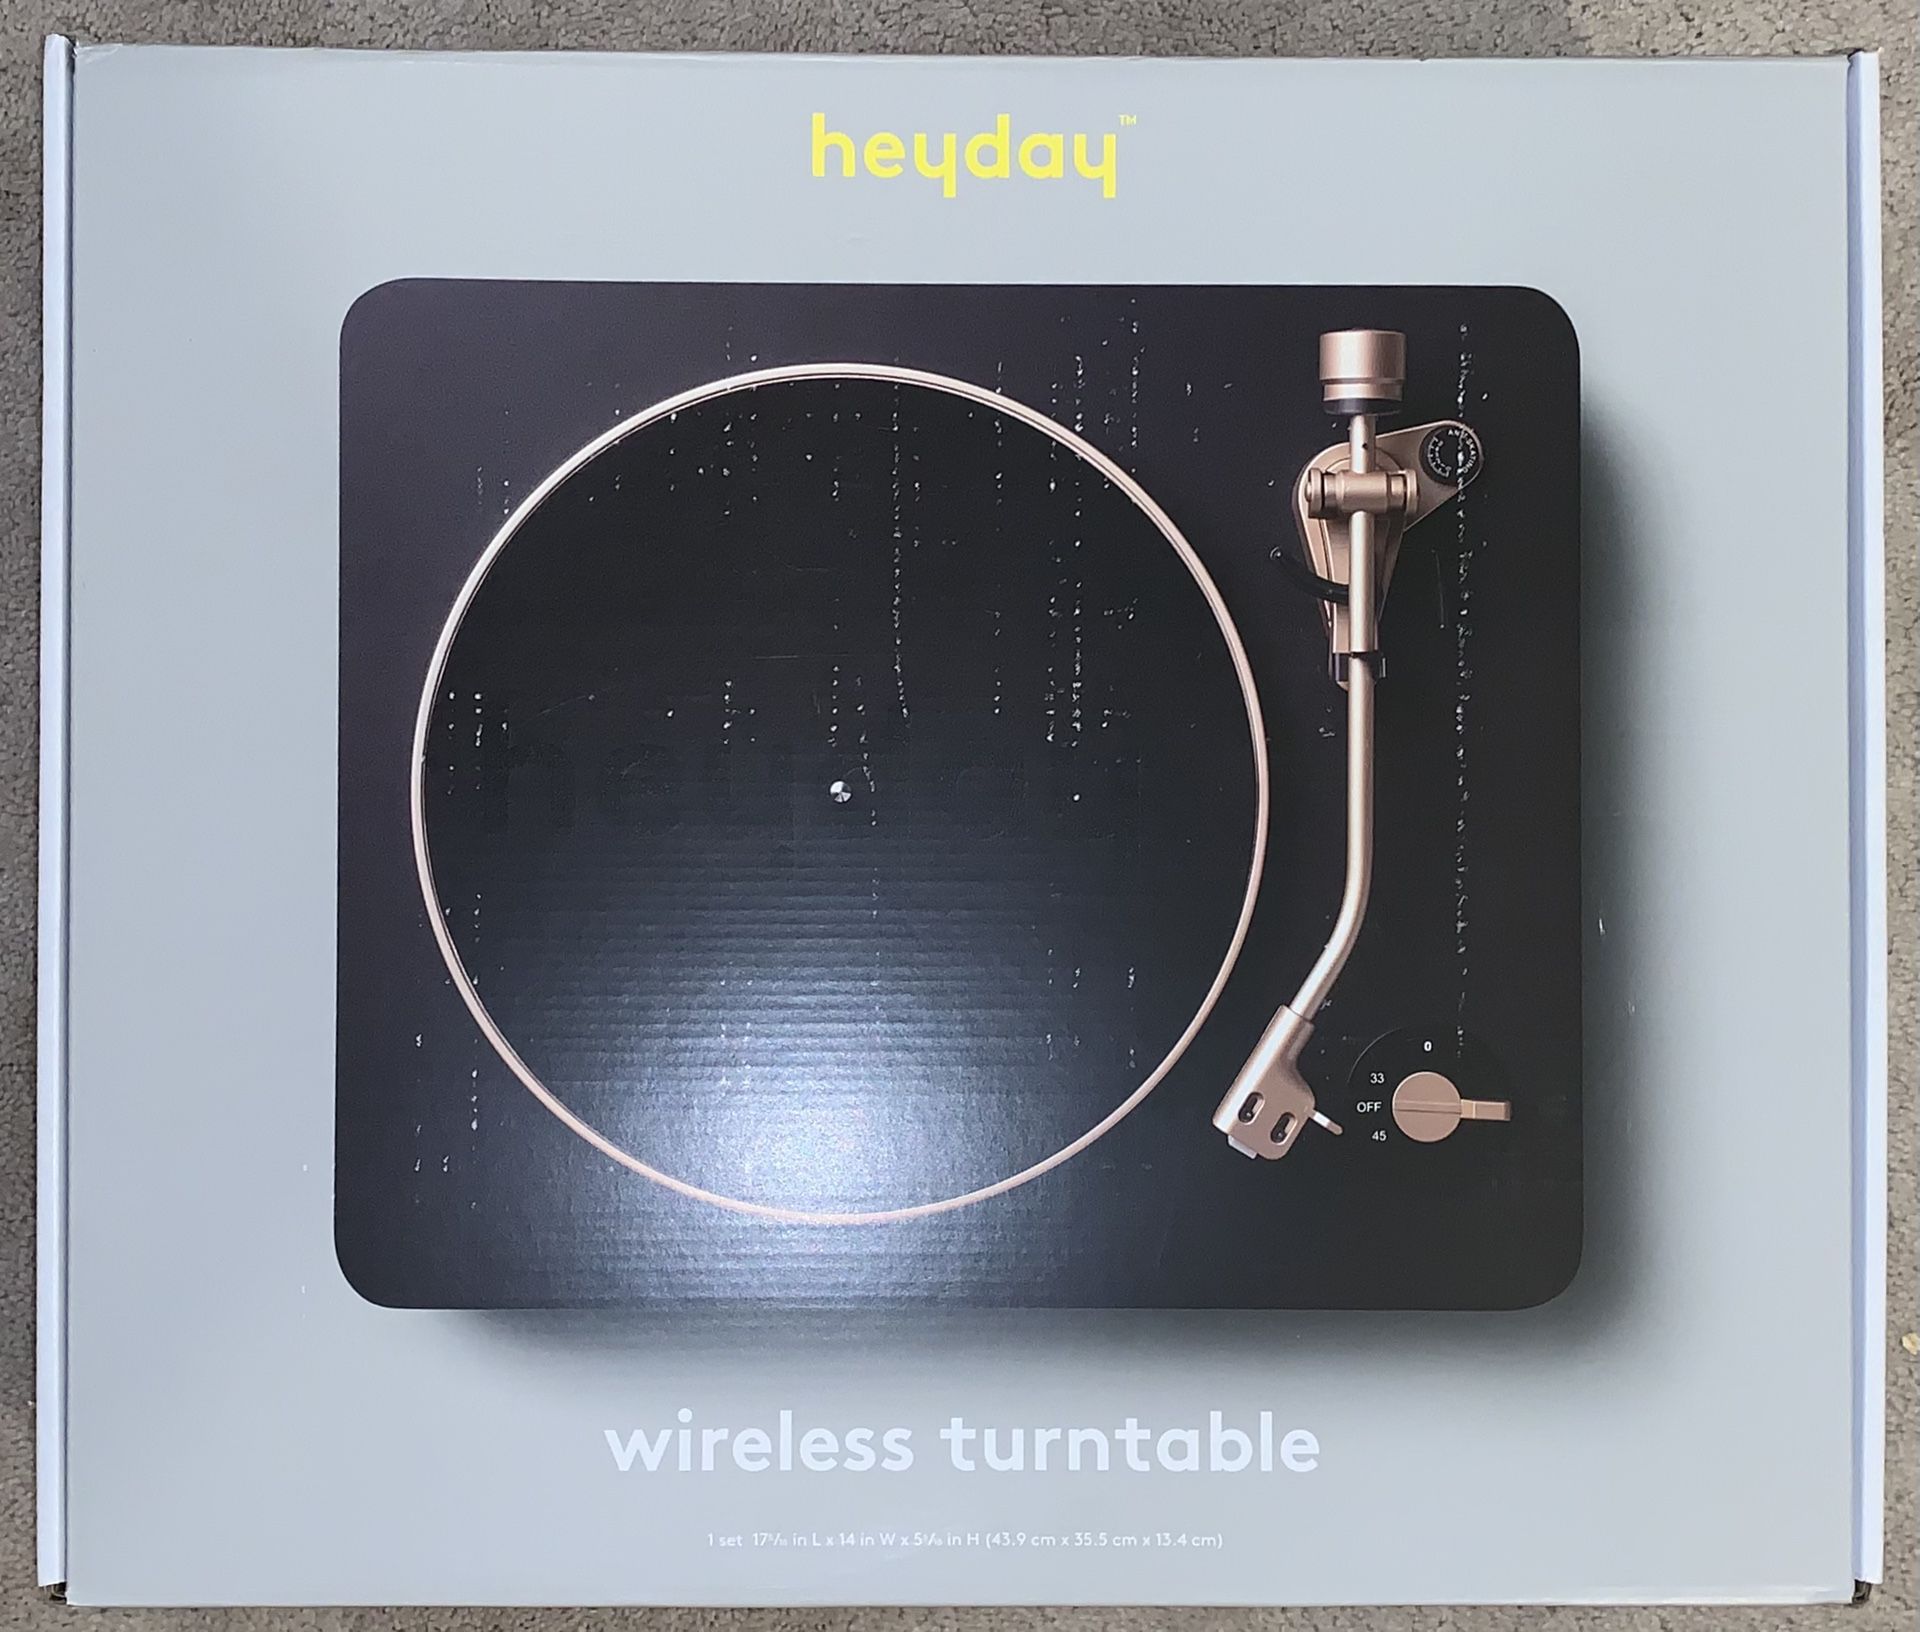 Heyday wireless turntable *brand new/never used/in box